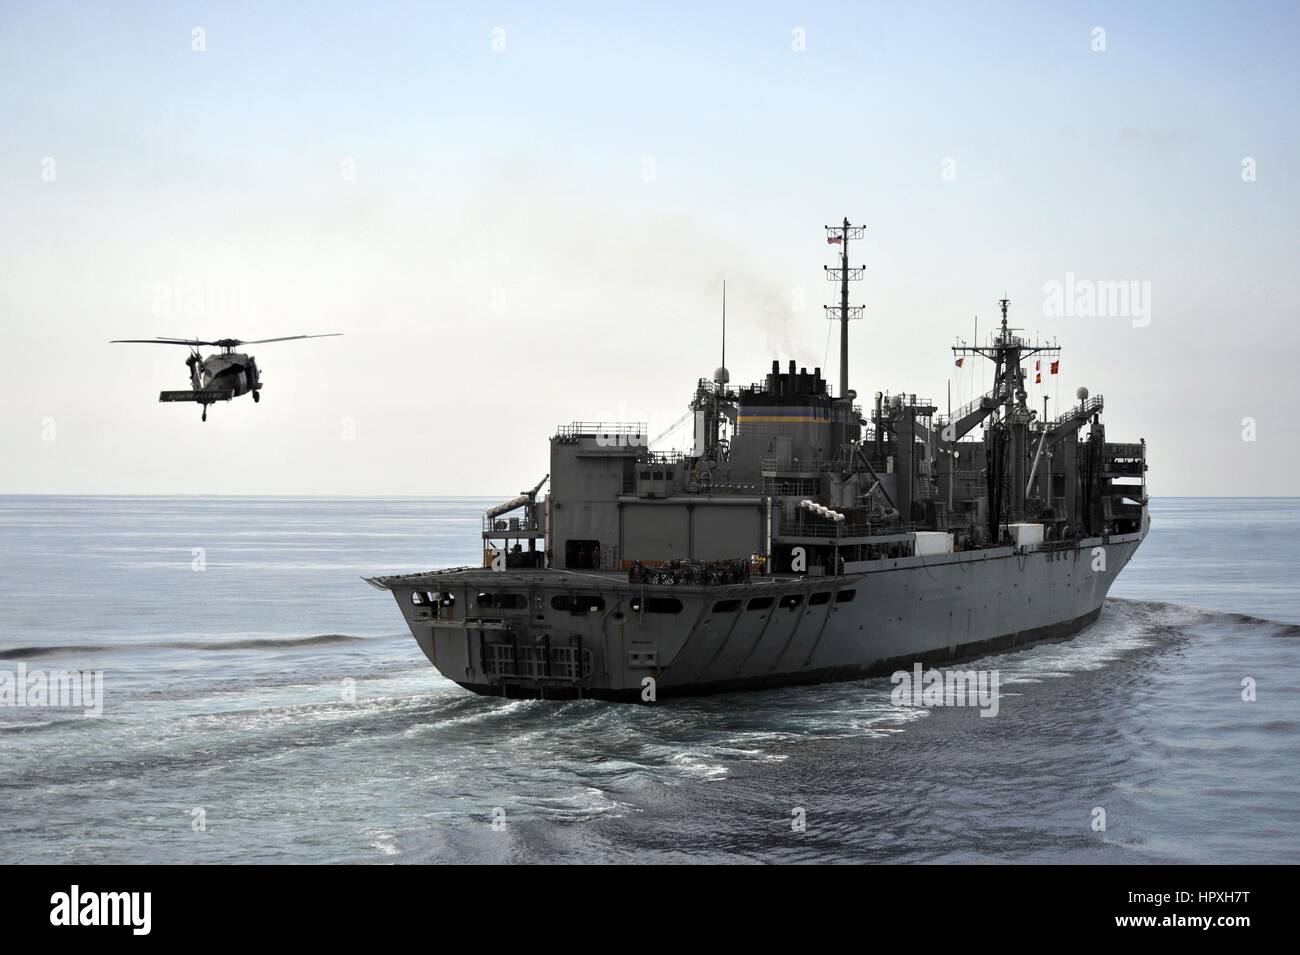 An SH-60B sea hawk helicopter approaches USNS Bridge at sea, December 19, 2012. Image courtesy of US Navy Mass communication specialist 2nd class Deven B King. Stock Photo